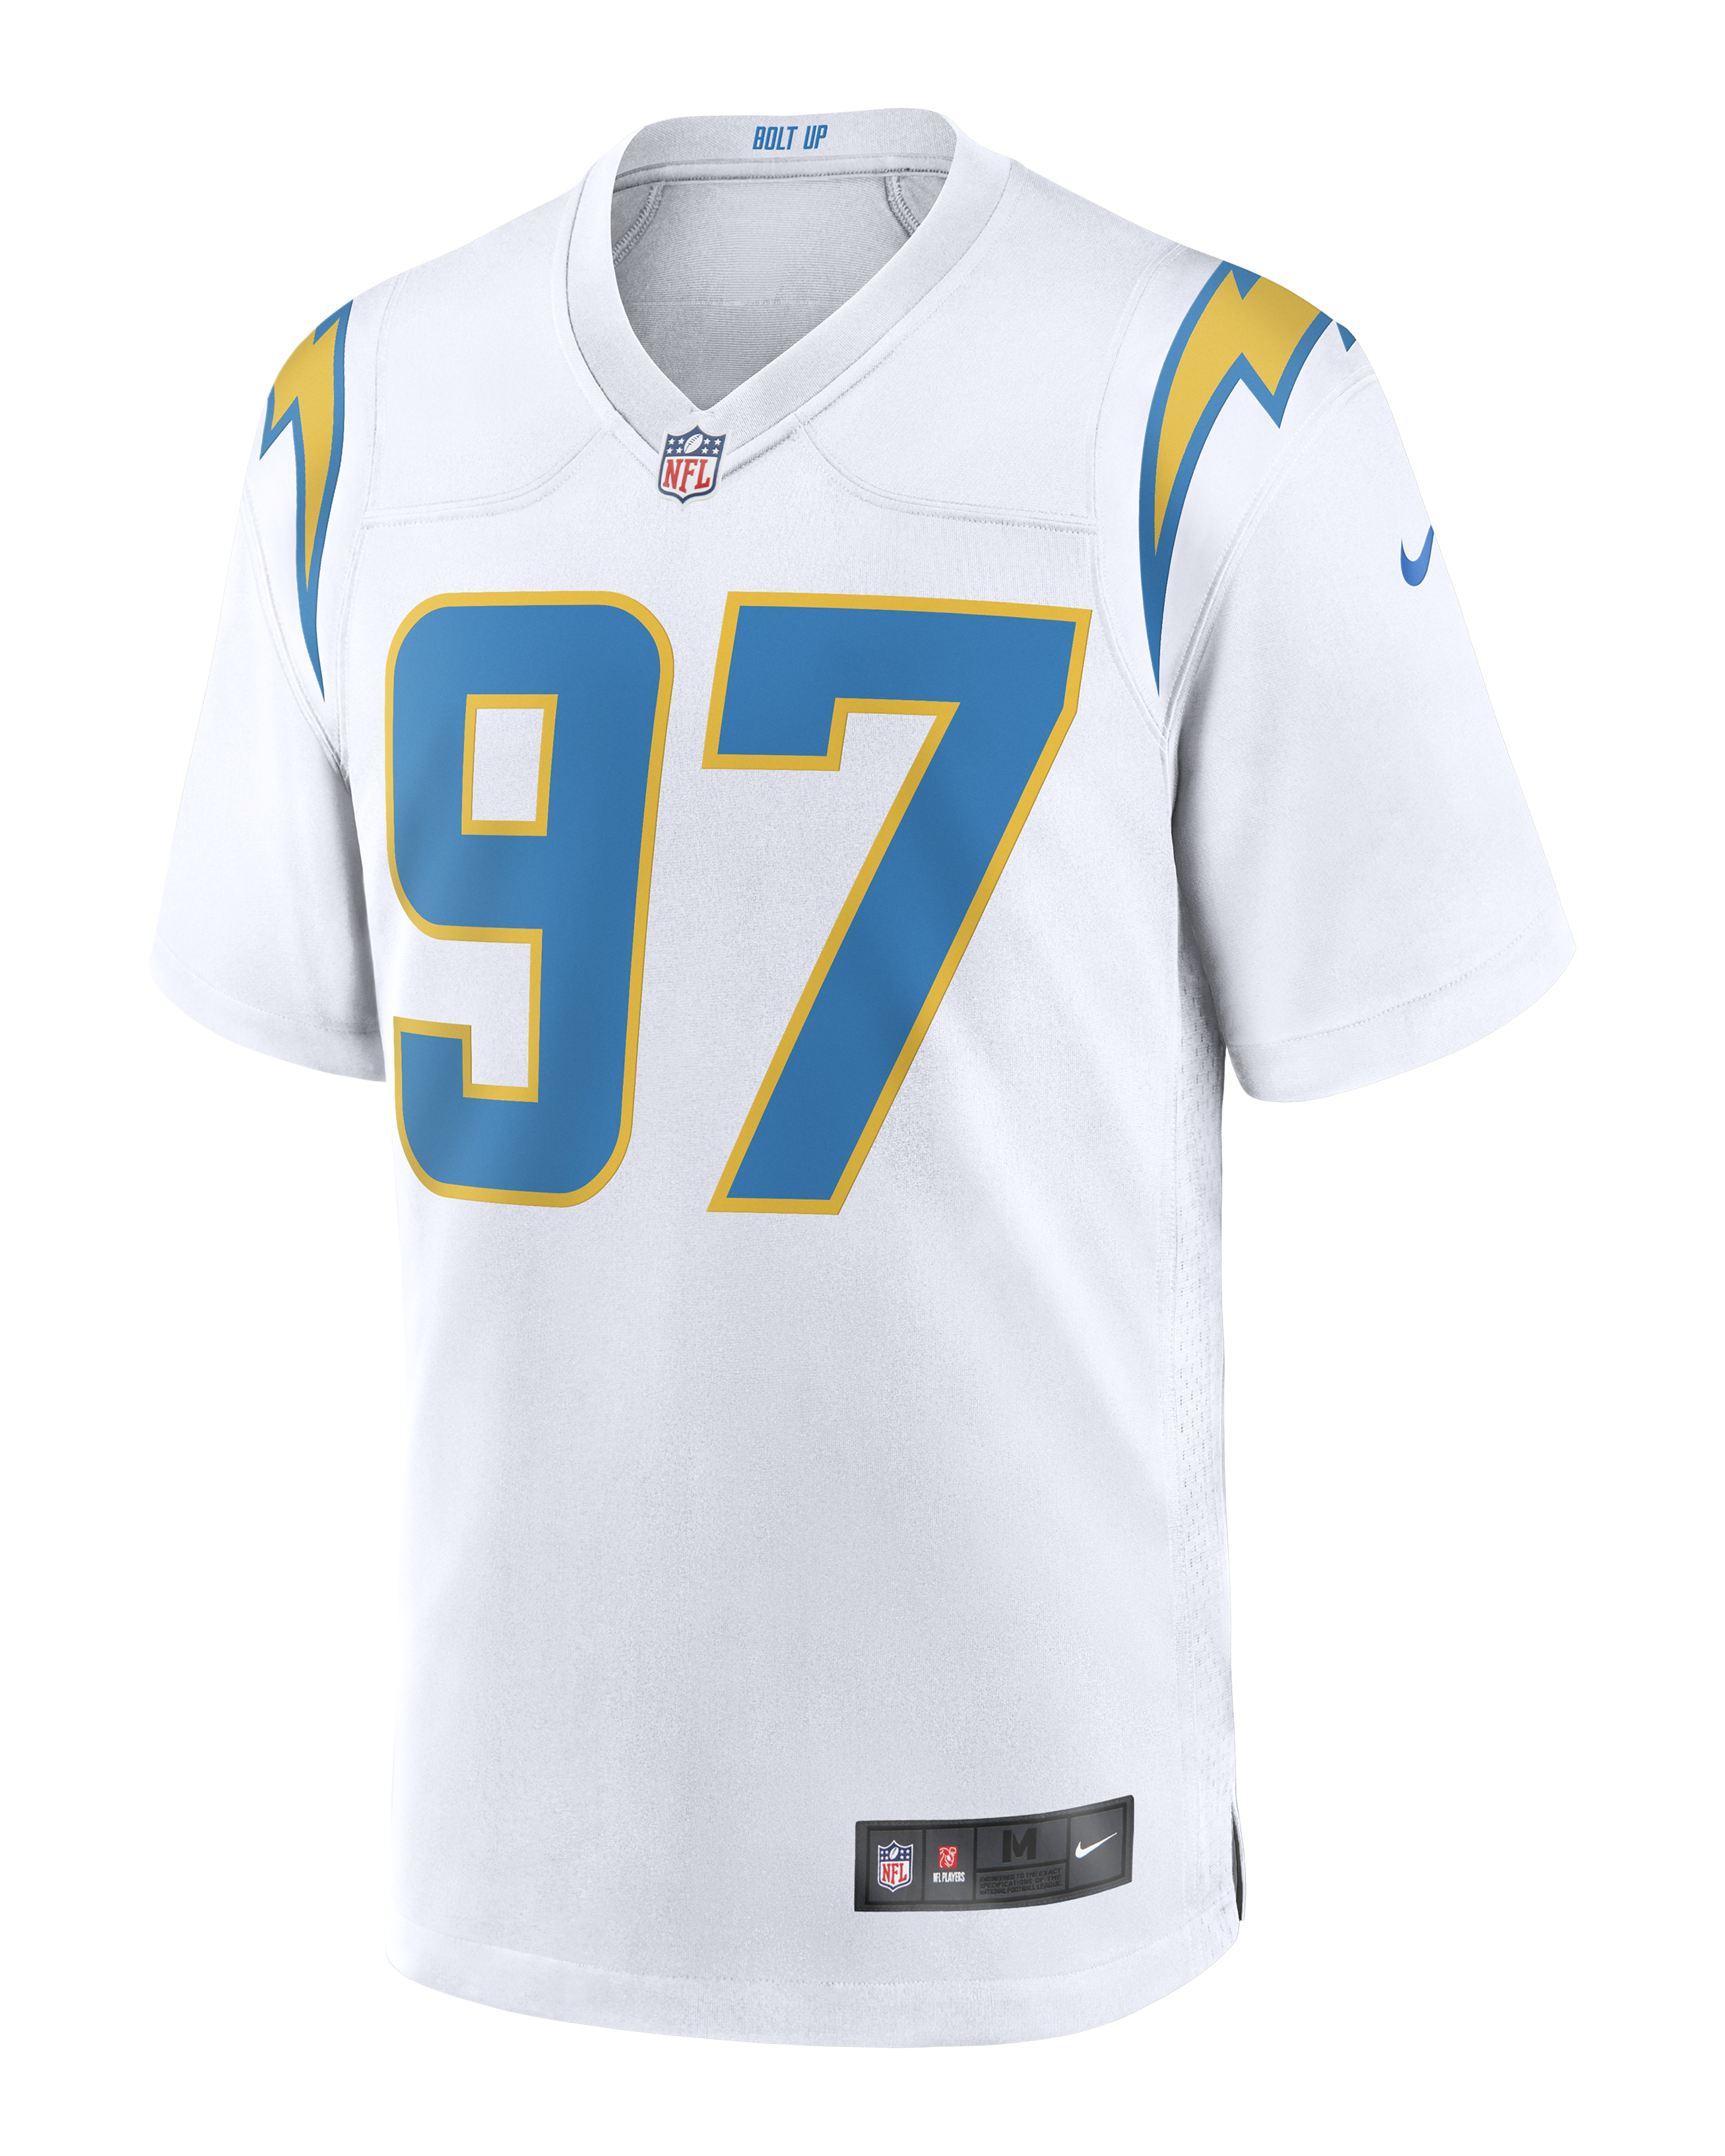 Nike - NFL Los Angeles Chargers (Derwin James) Men's Game Football Jersey